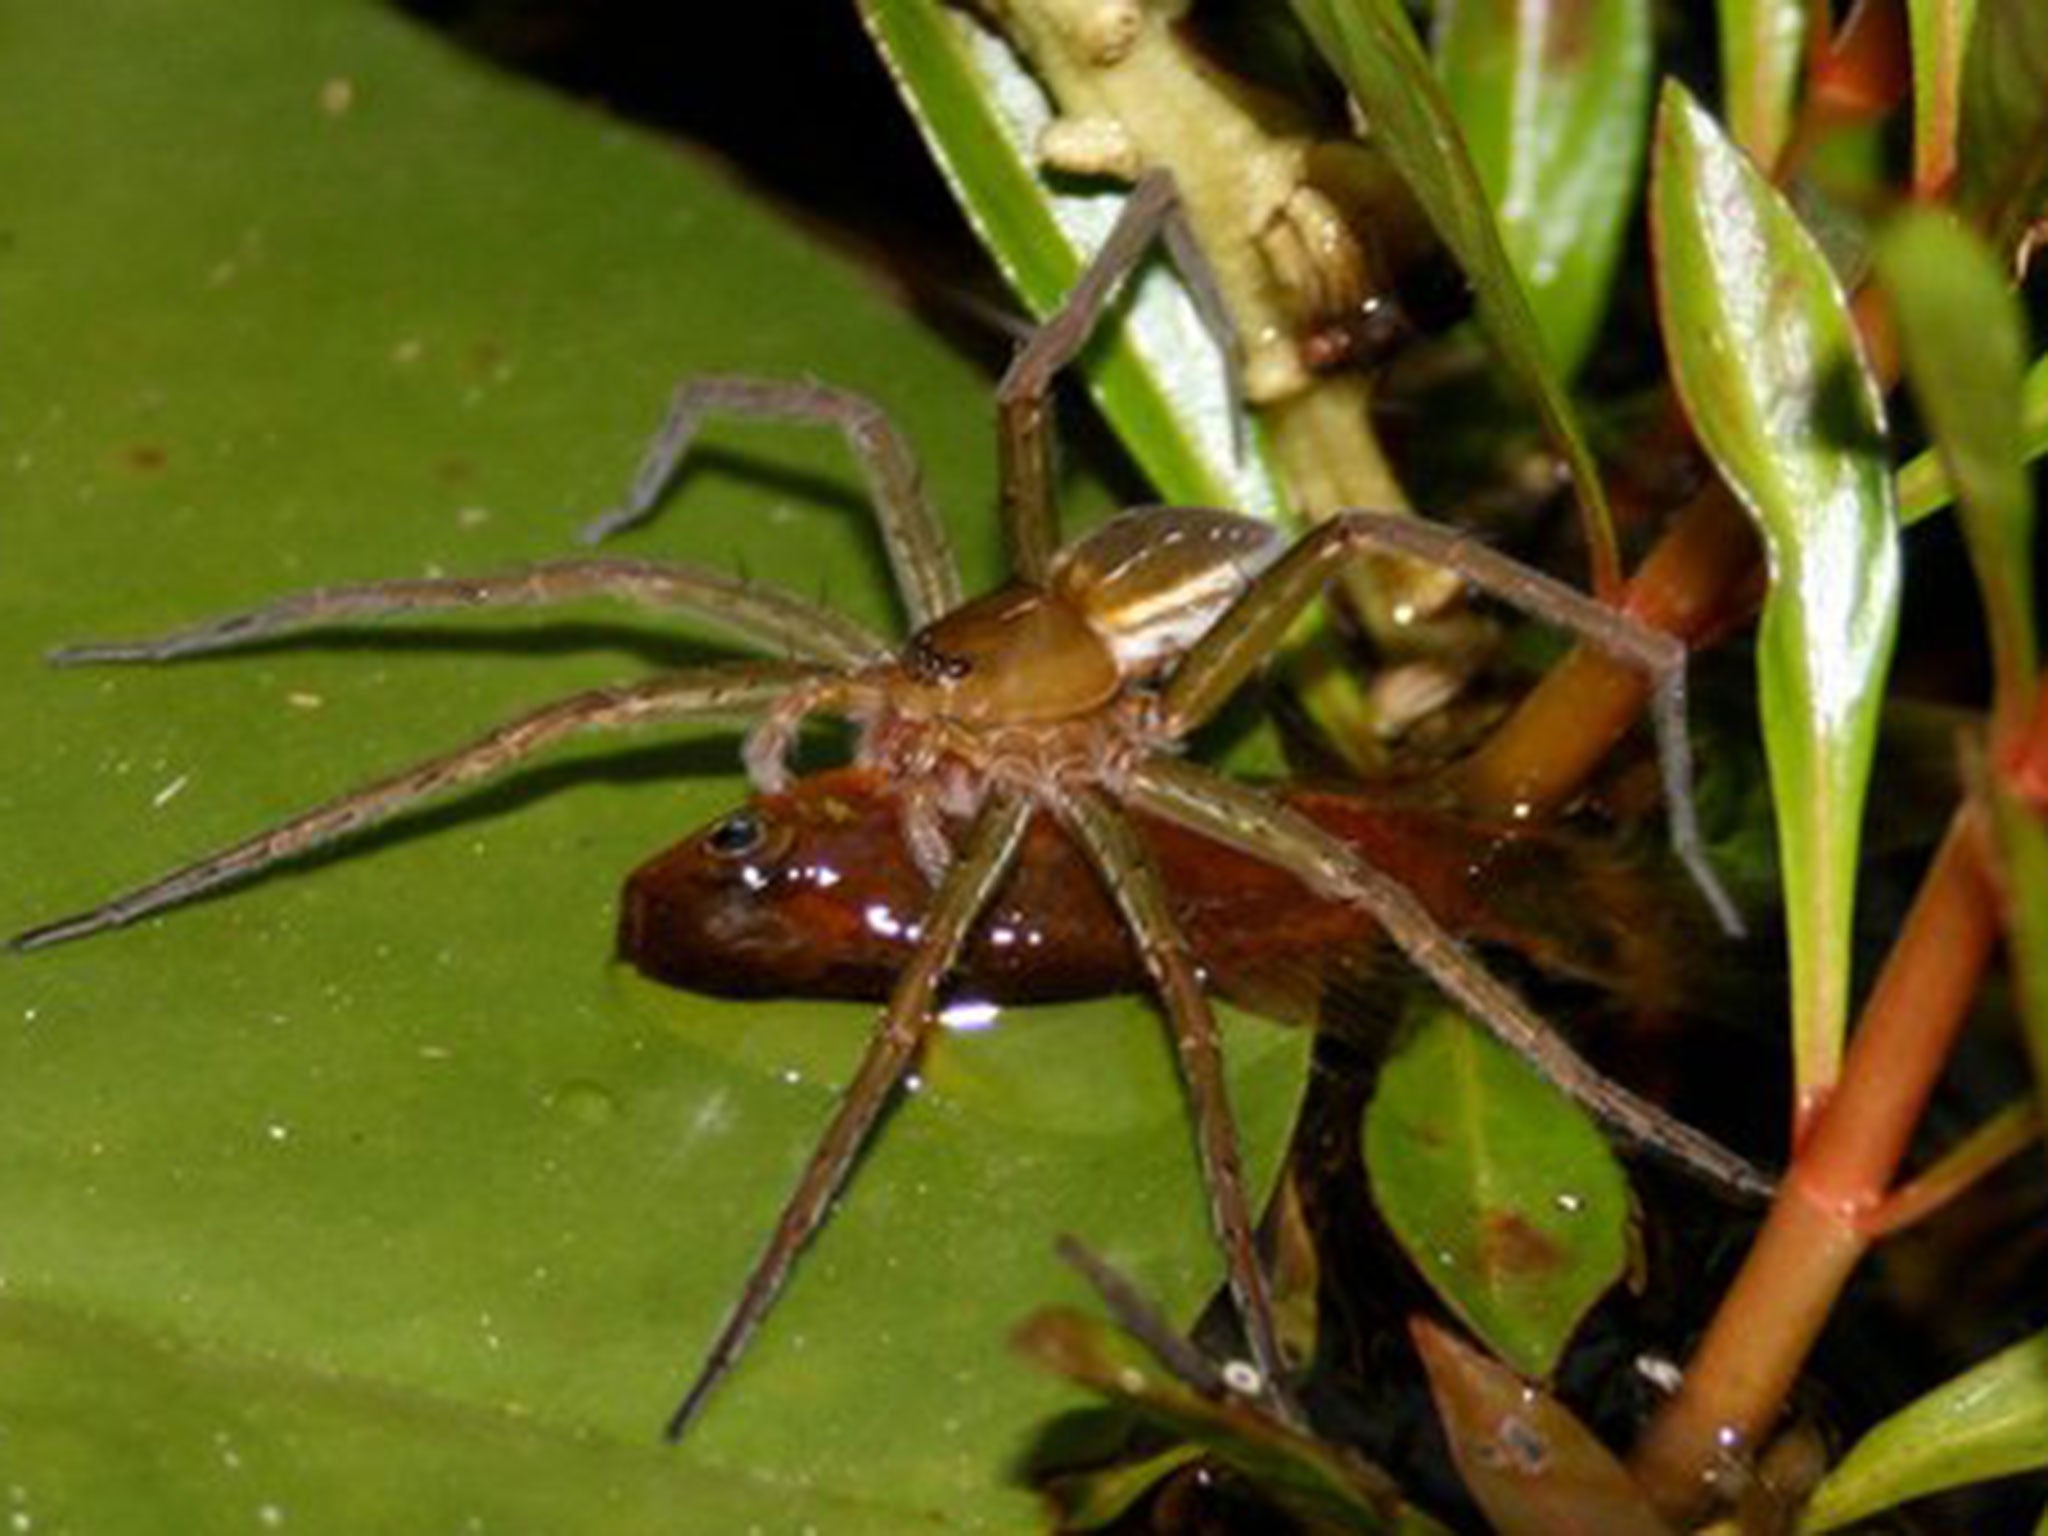 Dolomedes facetus captured pond fish (genus Xiphophorus) in a garden pond near Brisbane, Queensland, Australia. The number of spiders who catch and eat fish is on the rise across the world, scientists believe.